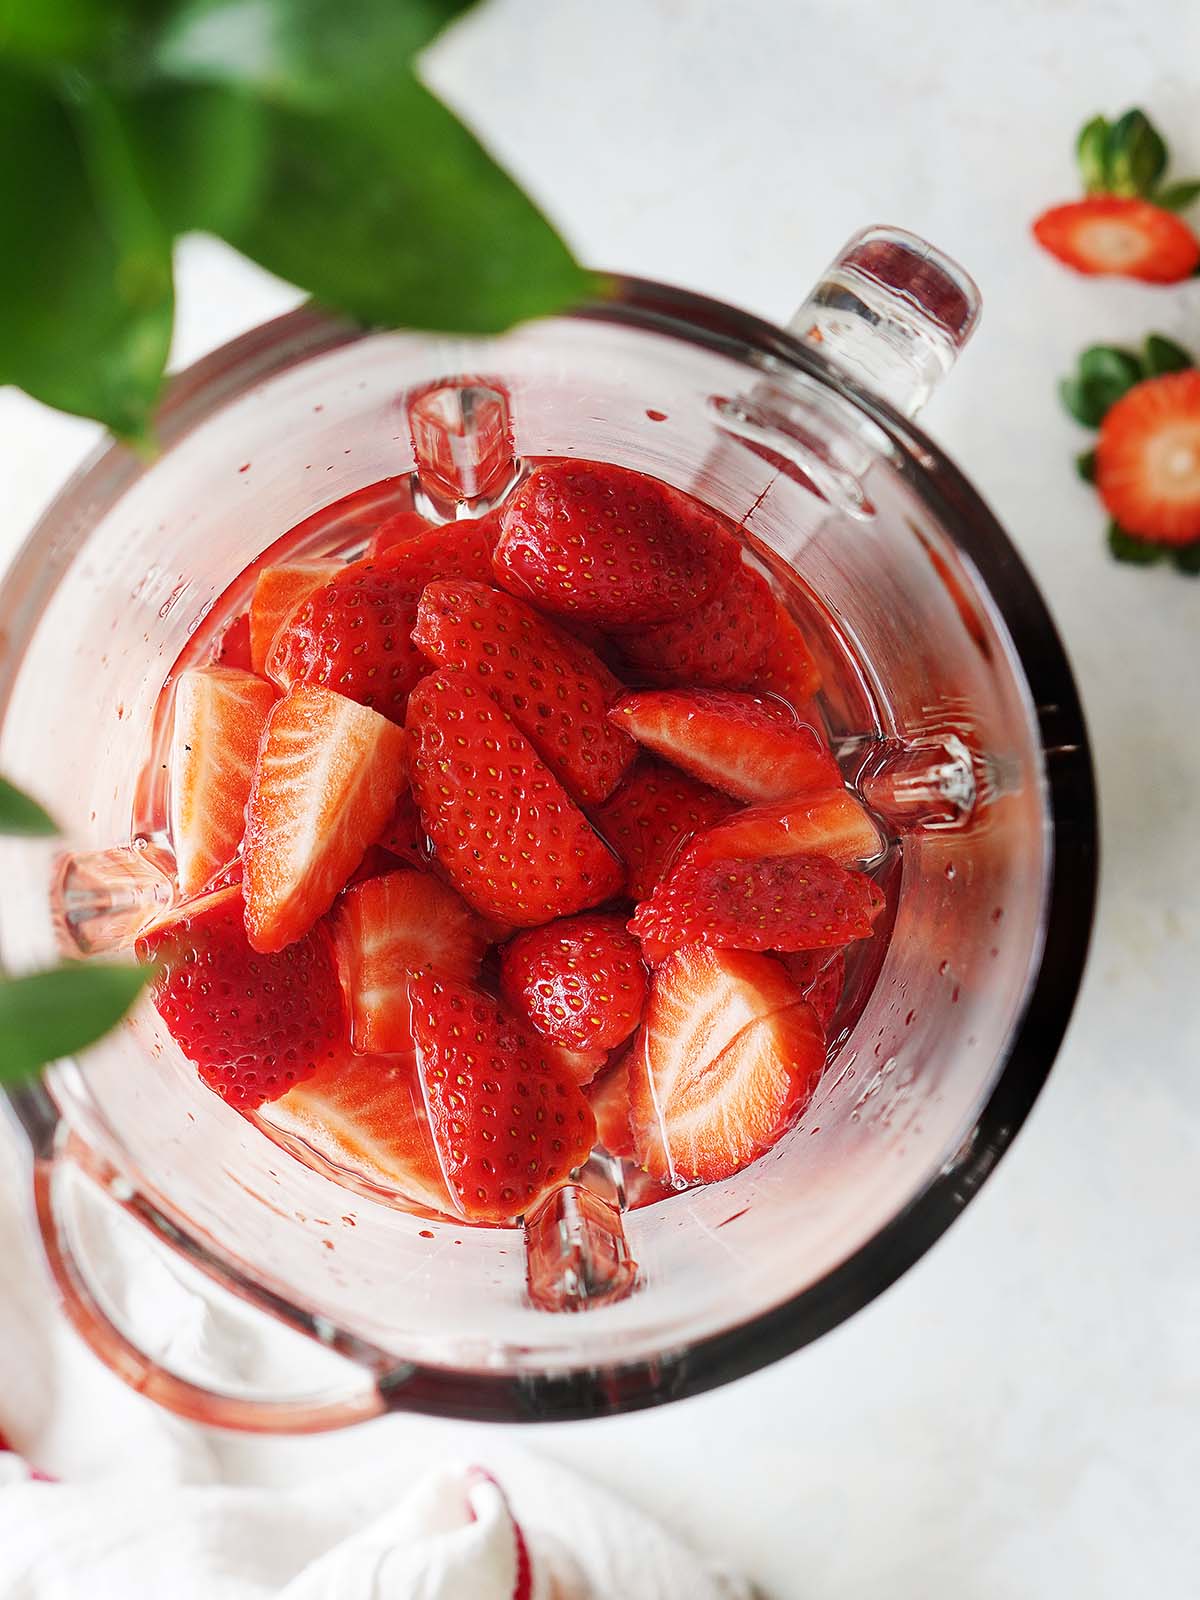 Chopped strawberries in a blender glass.